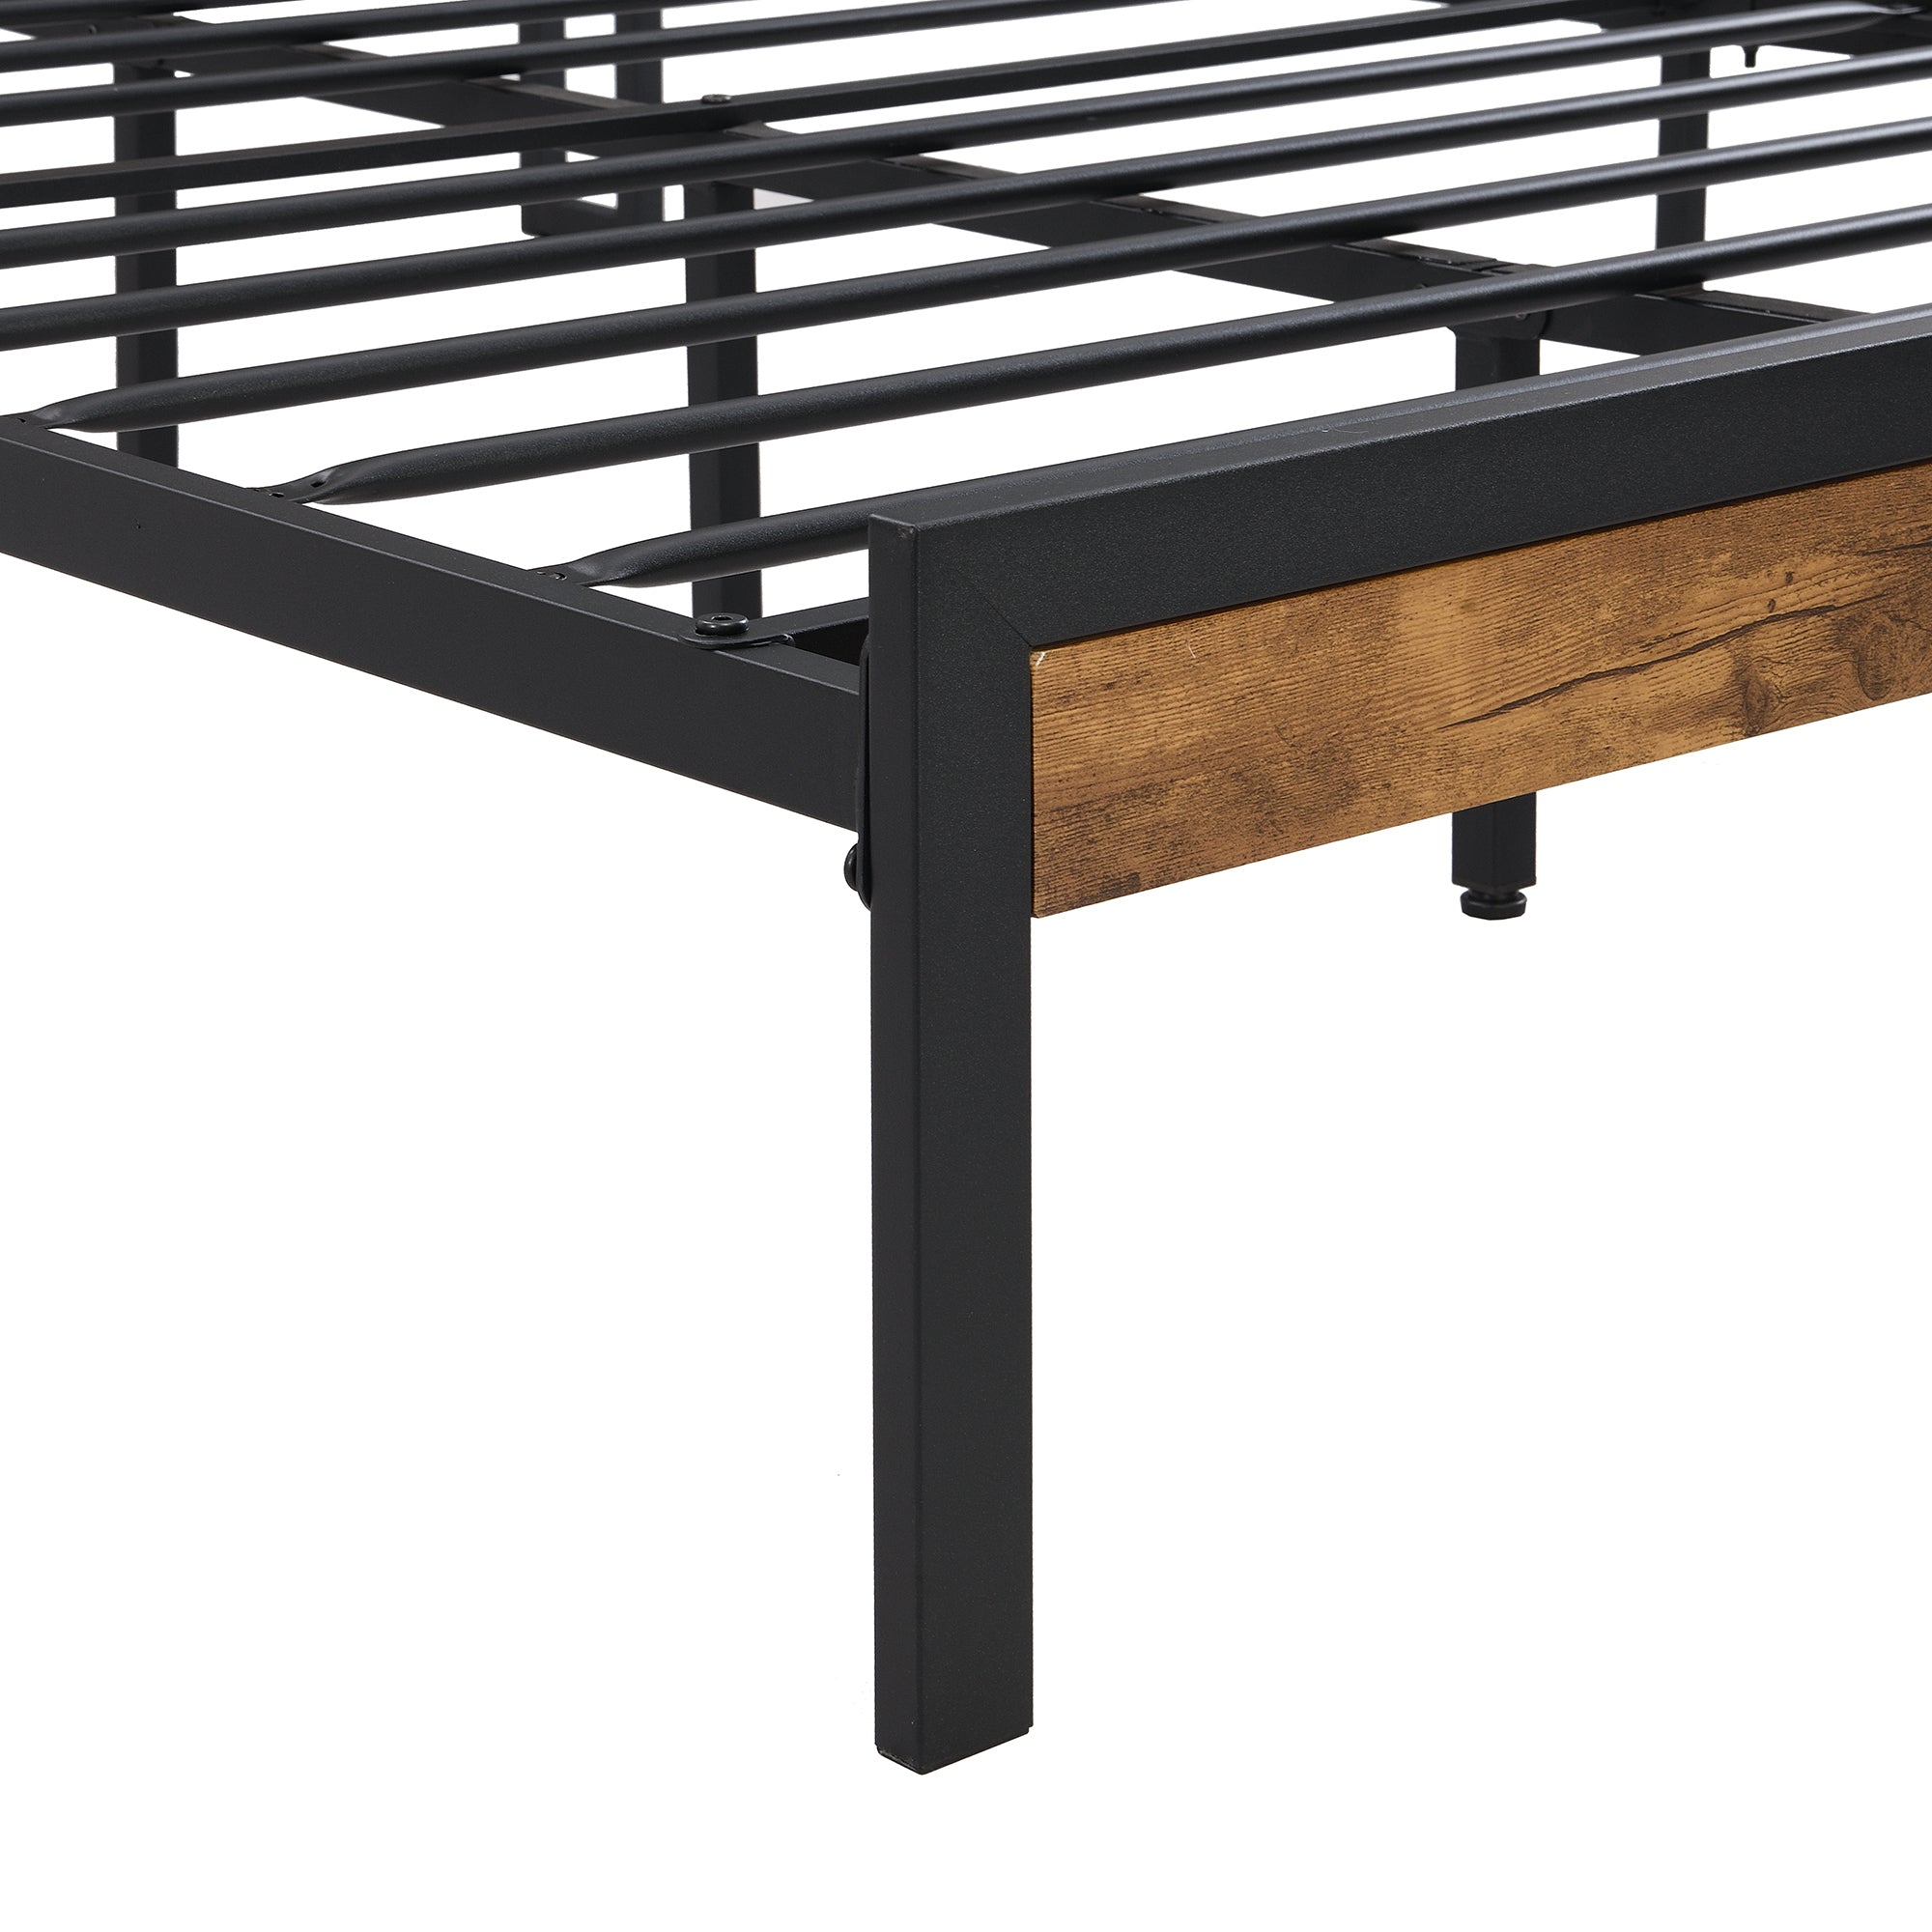 Queen Size Metal Platform Bed Frame with Wooden Headboard & Footboard, USB LINER | No Box Spring | Large Under Bed Storage | Easy Assembly